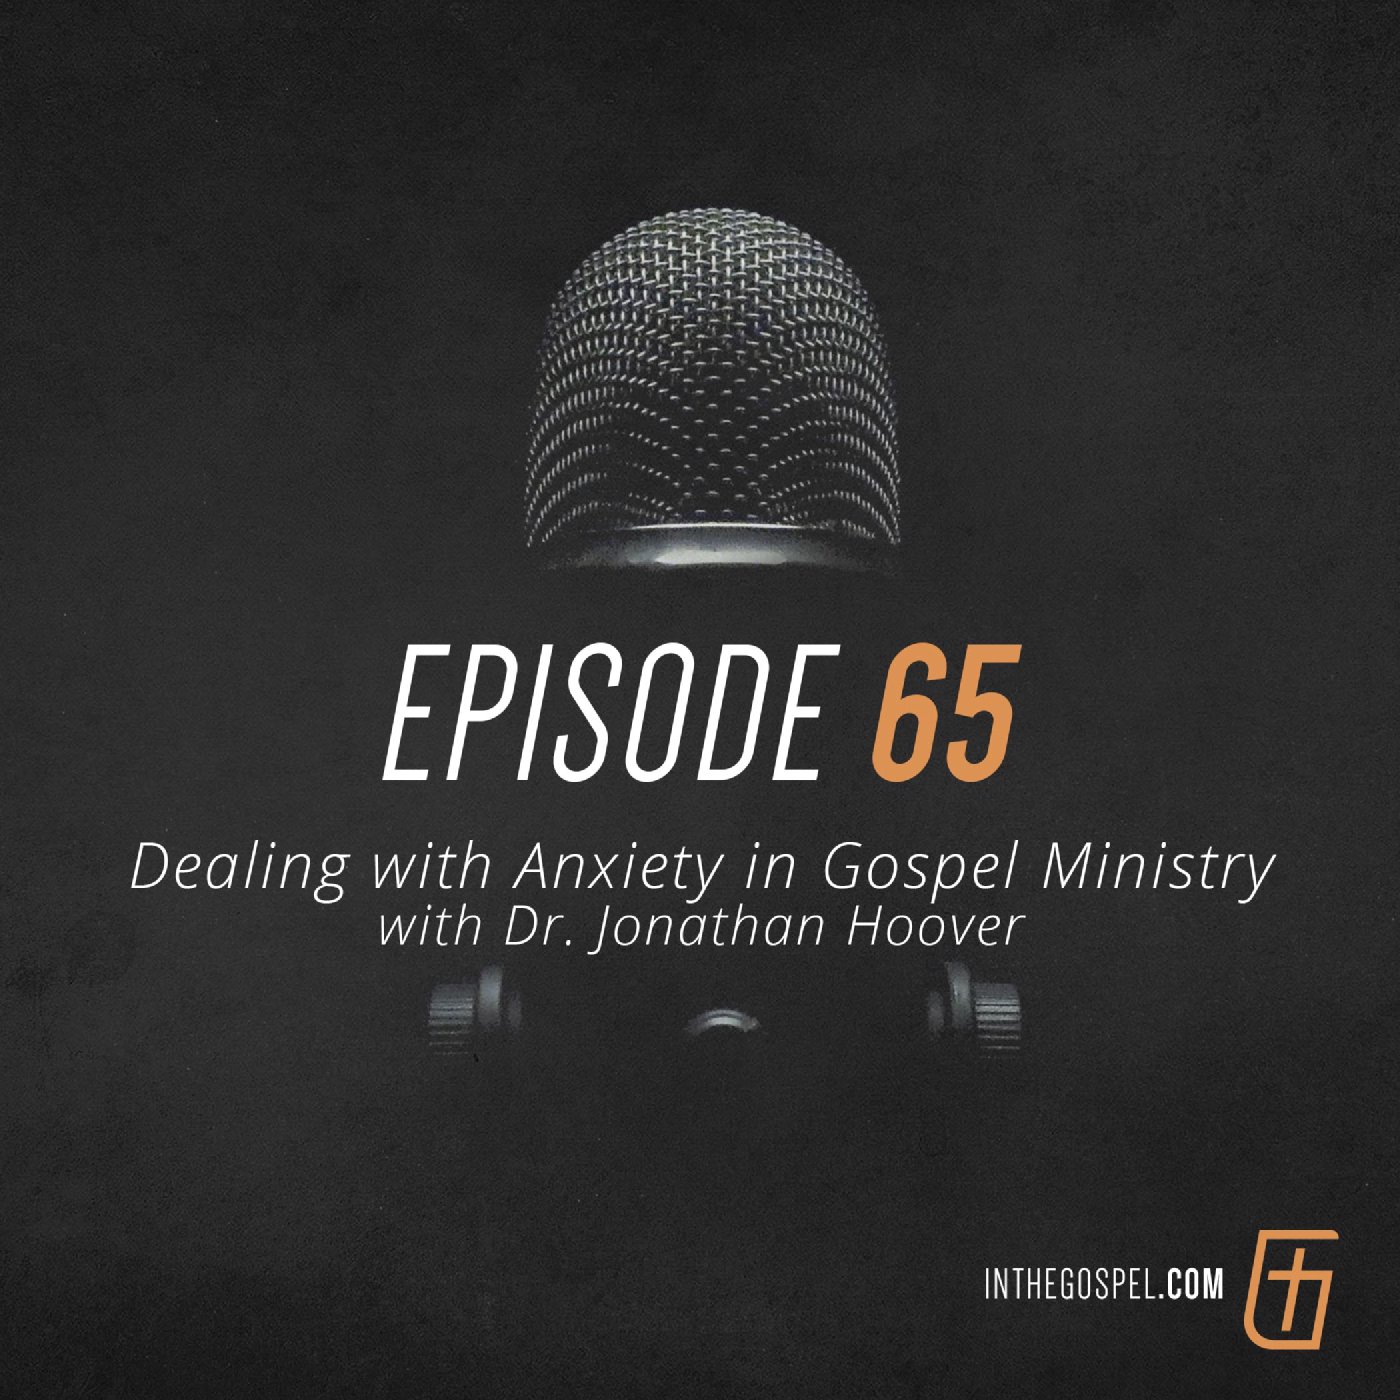 Episode 65: Dealing with Anxiety in Gospel Ministry with Dr. Jonathan Hoover